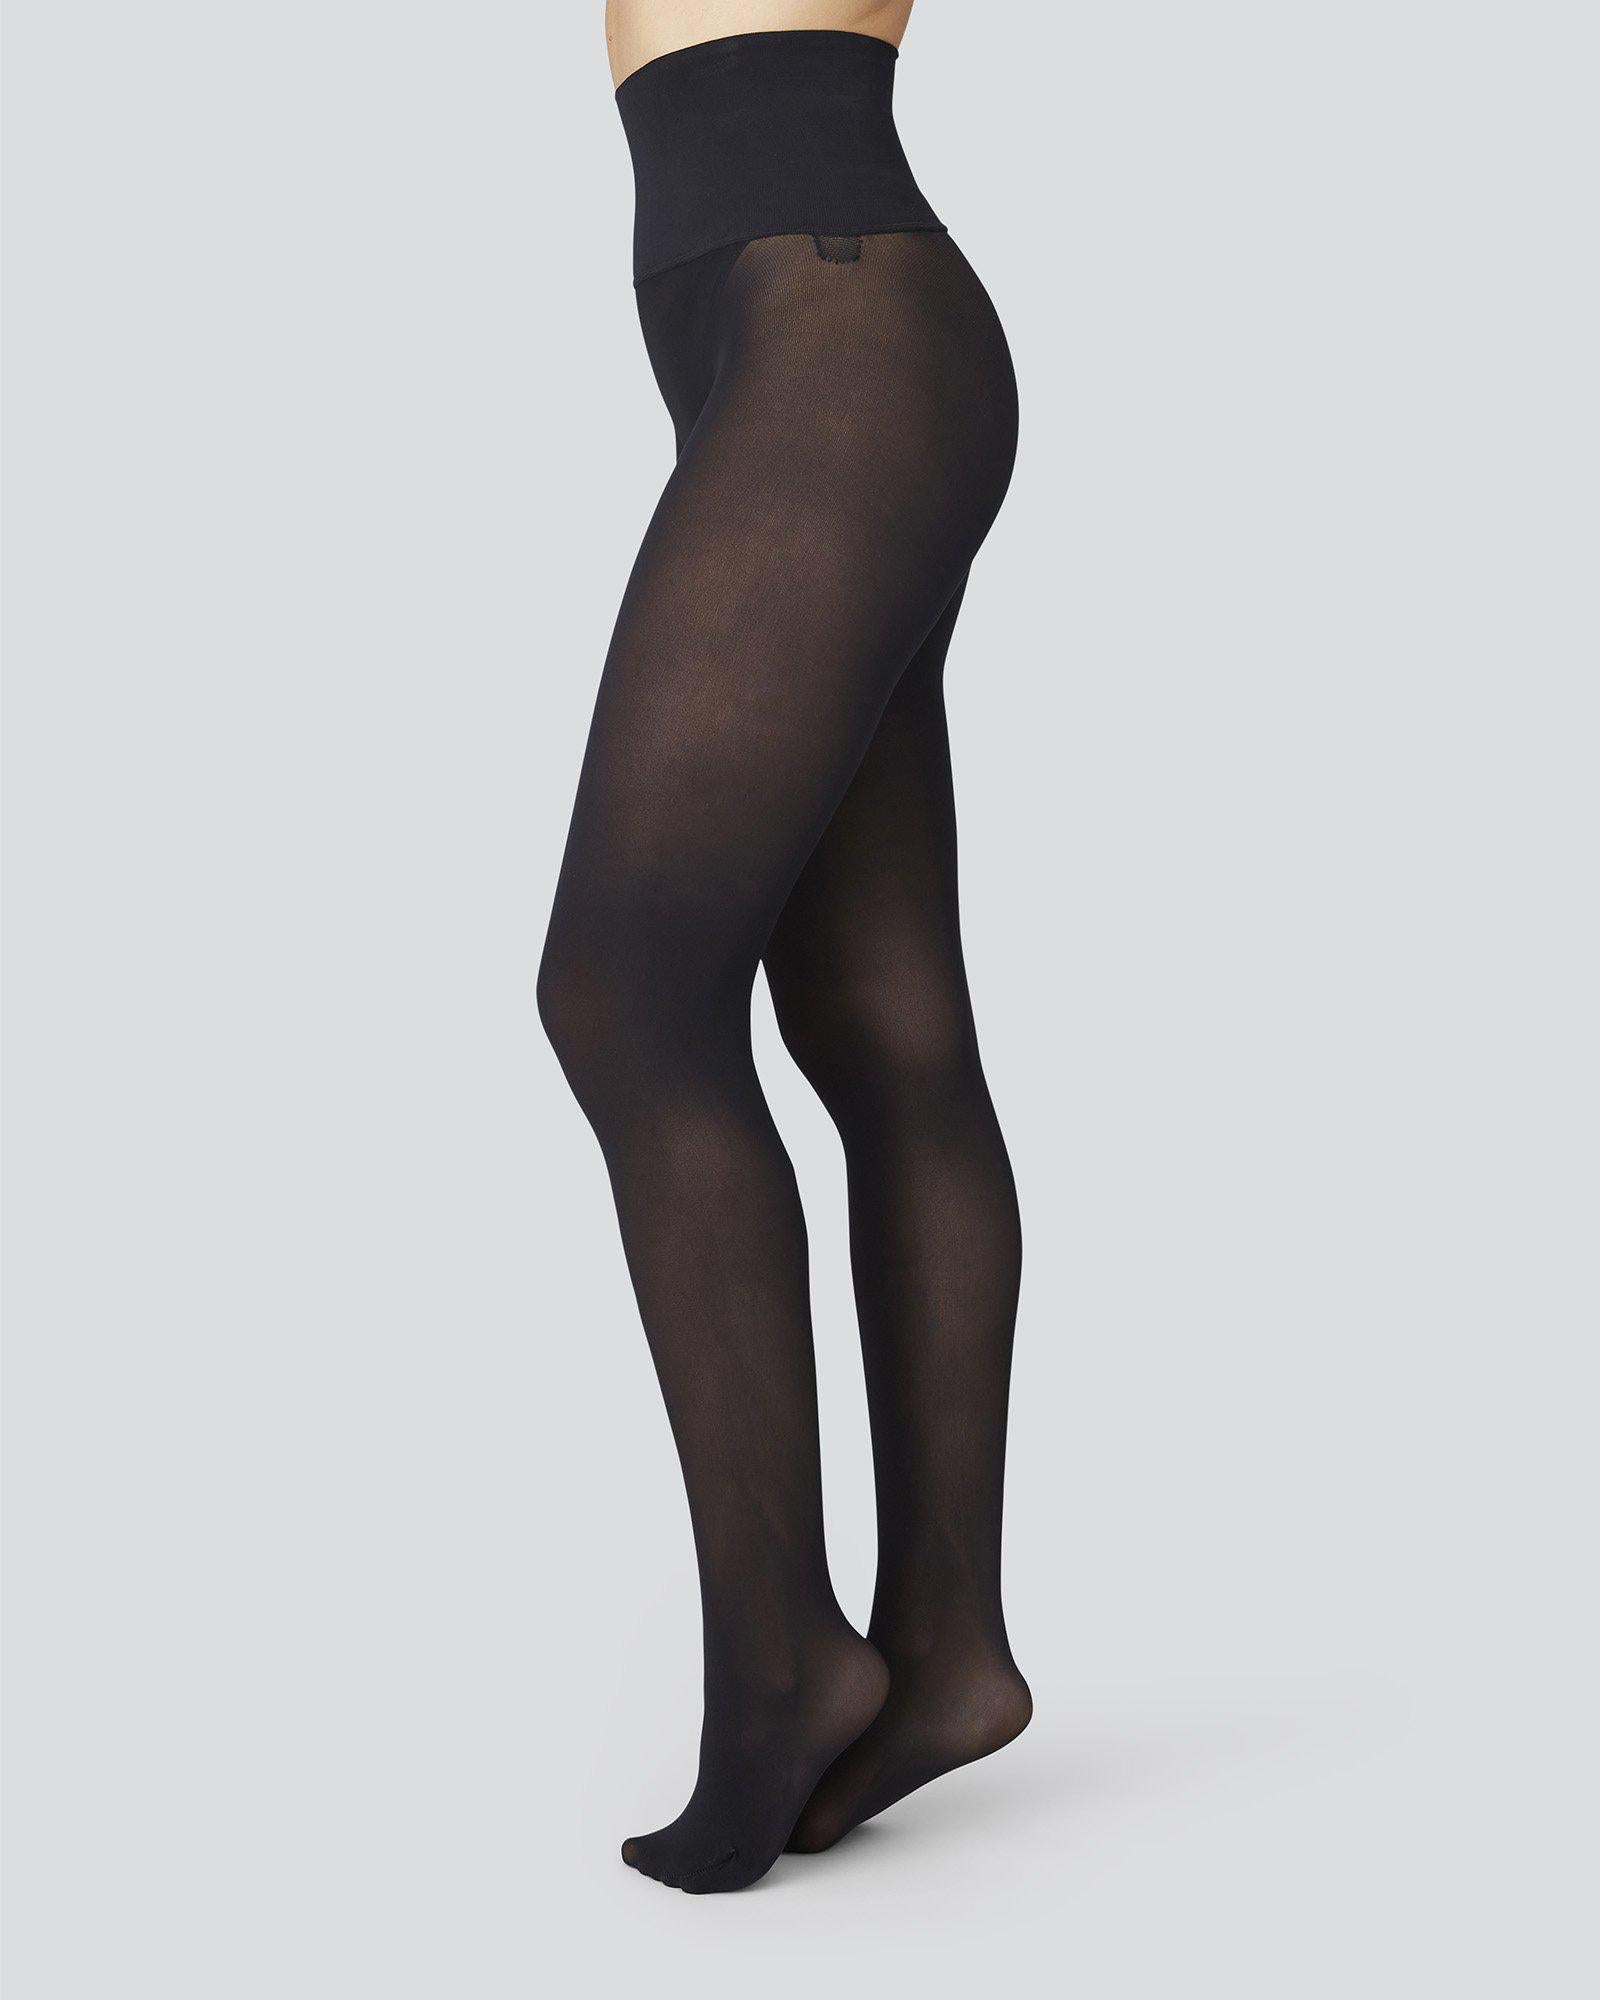 Swedish Stockings Hanna Premium Seamless Tights  Anthropologie Japan -  Women's Clothing, Accessories & Home